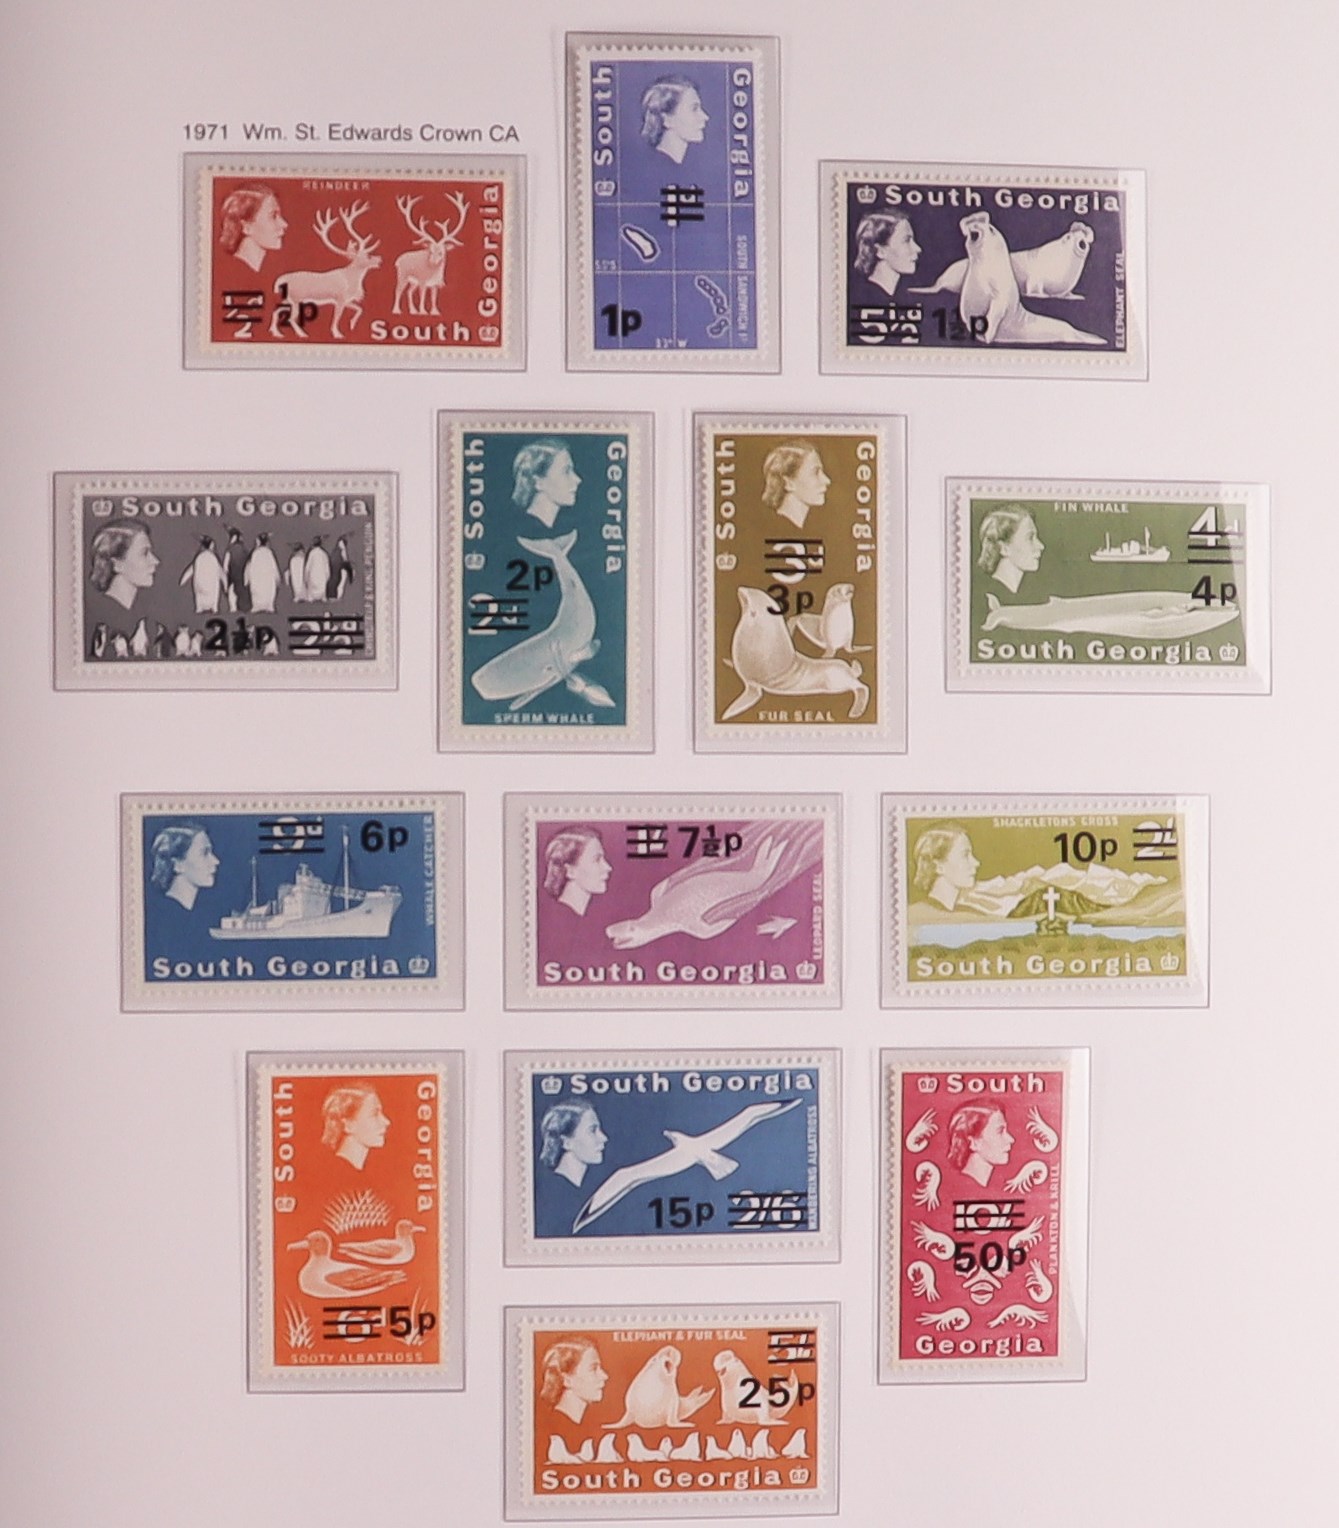 FALKLAND IS. DEPS. 1944 - 2009 NEVER HINGED MINT COLLECTION of Dependencies and South Georgia on - Image 10 of 16